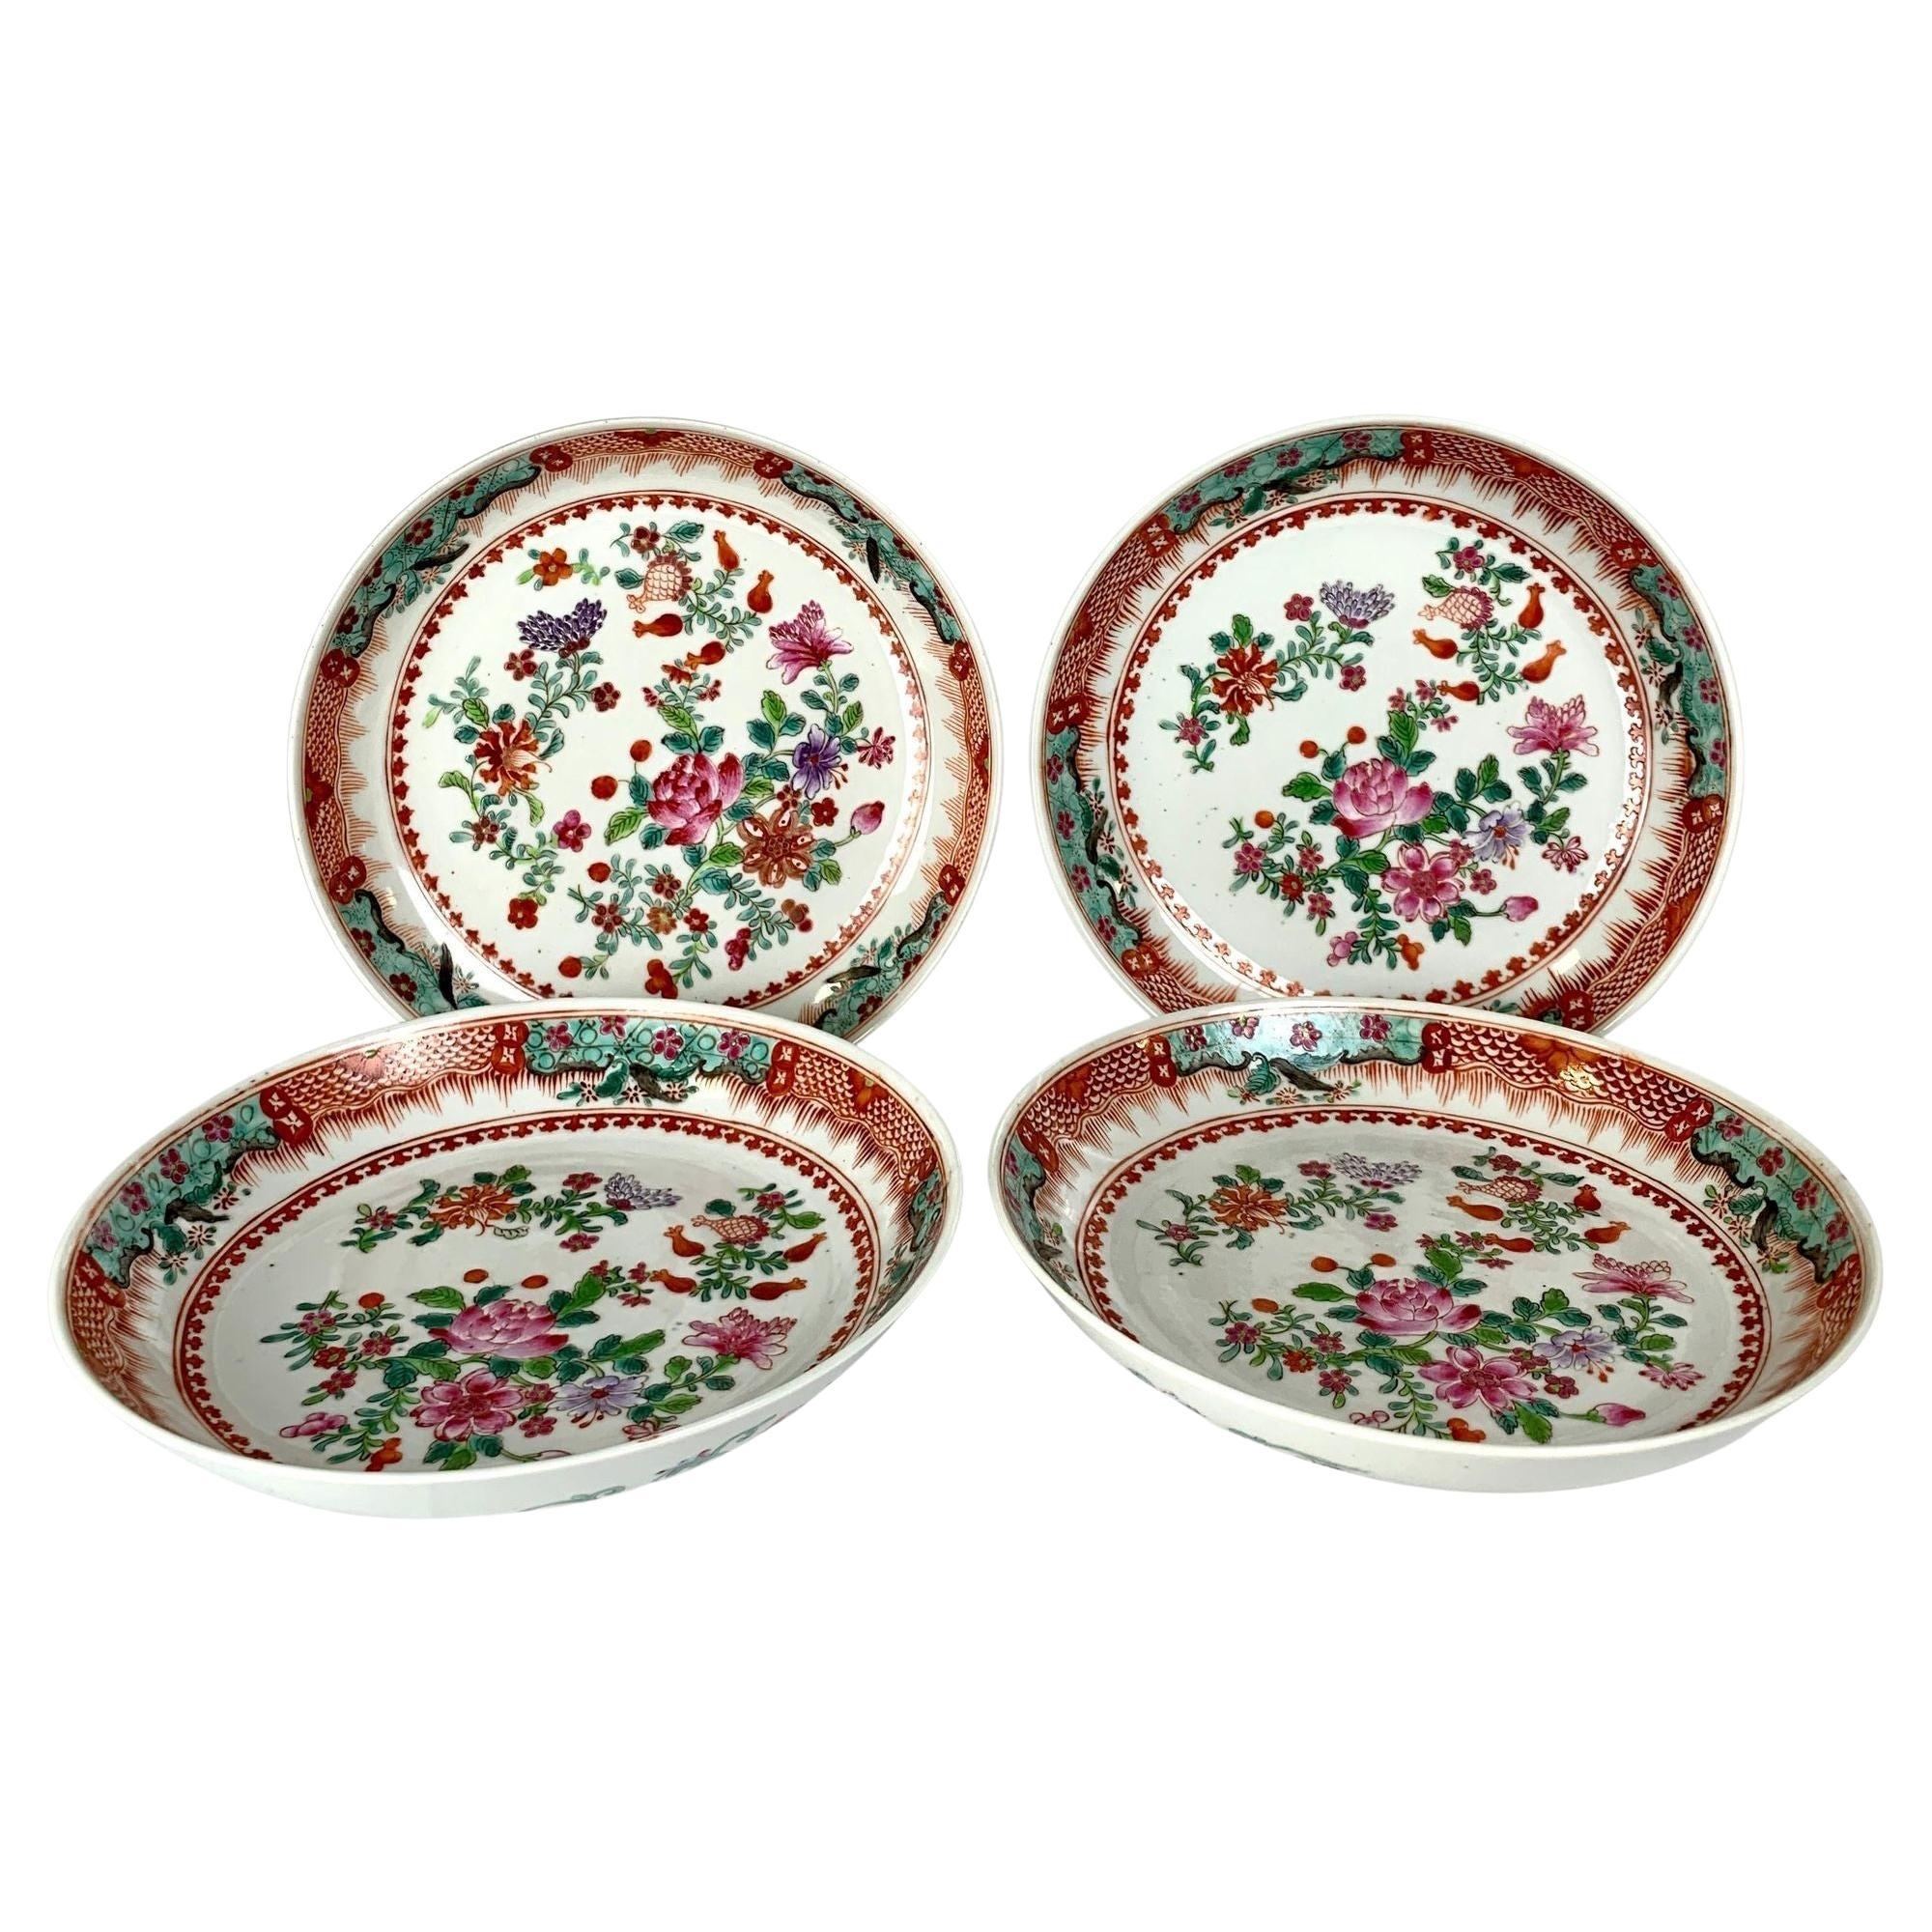 Set of Four Chinese Porcelain Famille Rose Dishes Late 19th Century Circa 1880